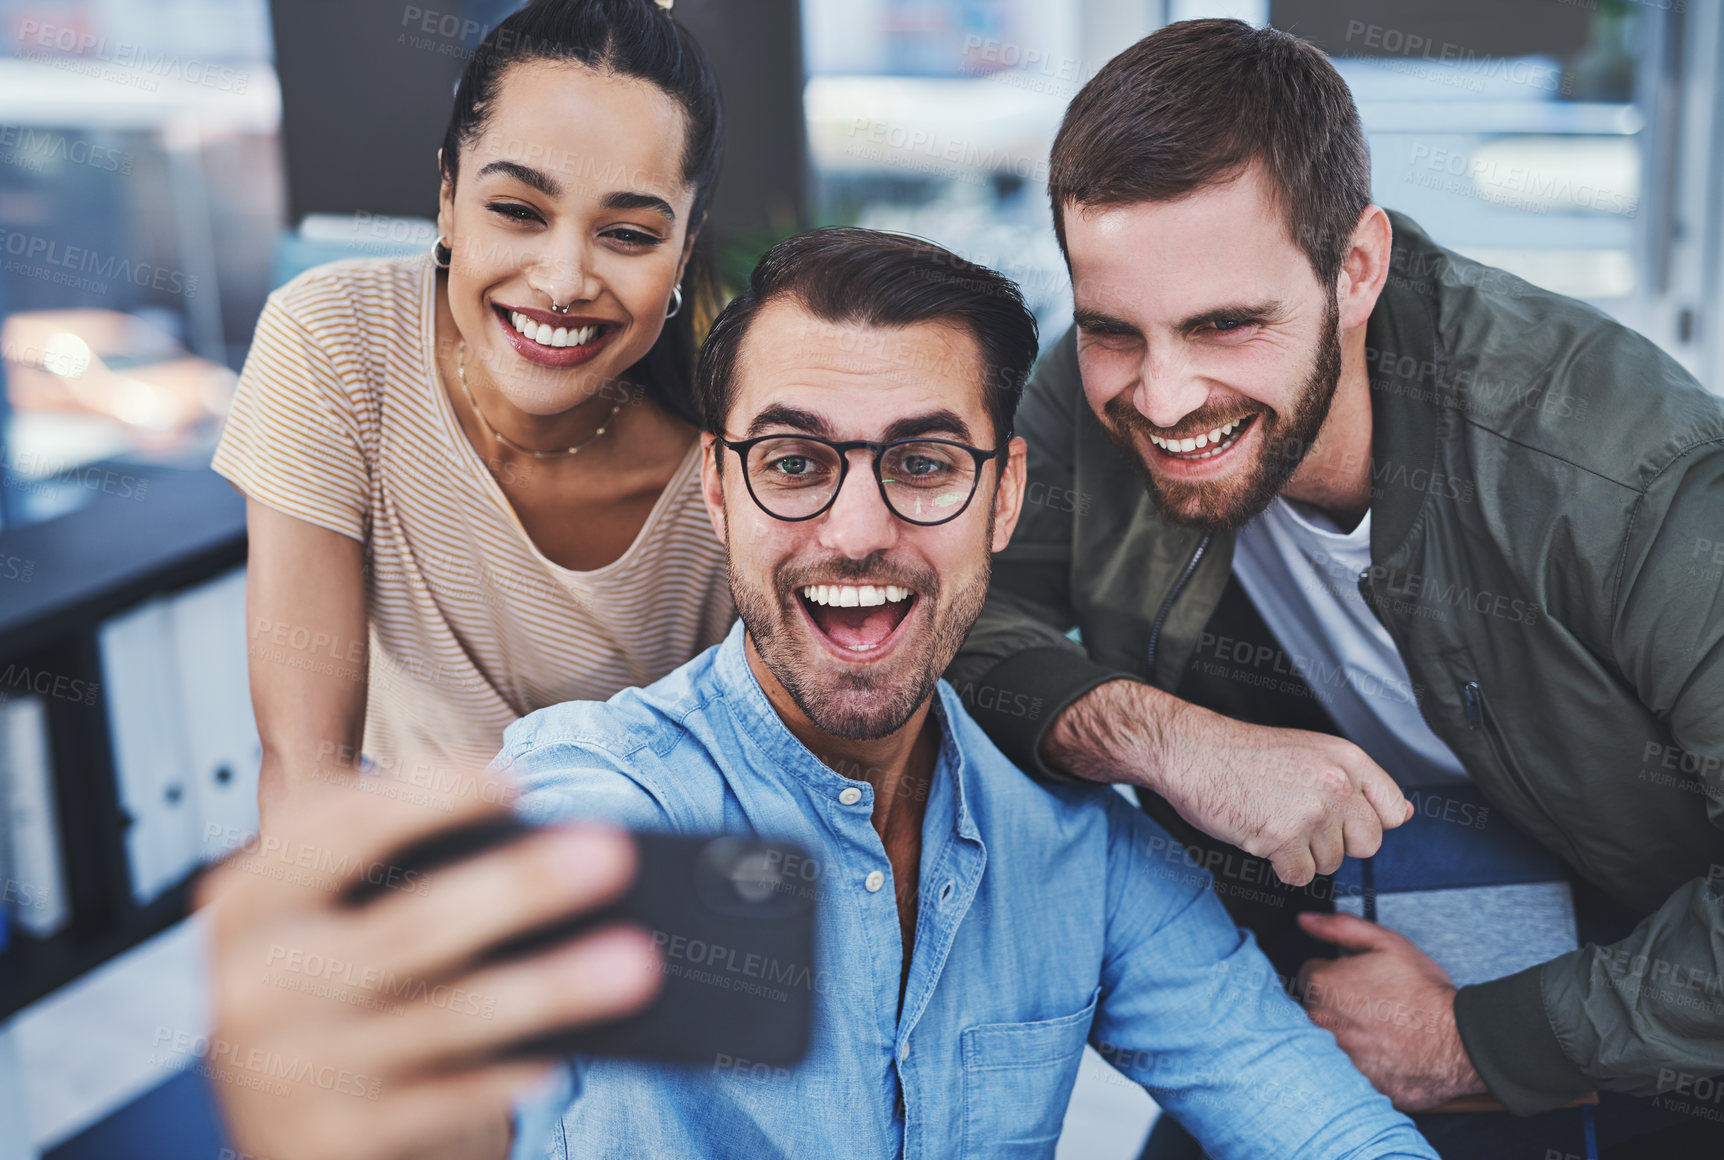 Buy stock photo Shot of a group of designers taking selfies together in an office